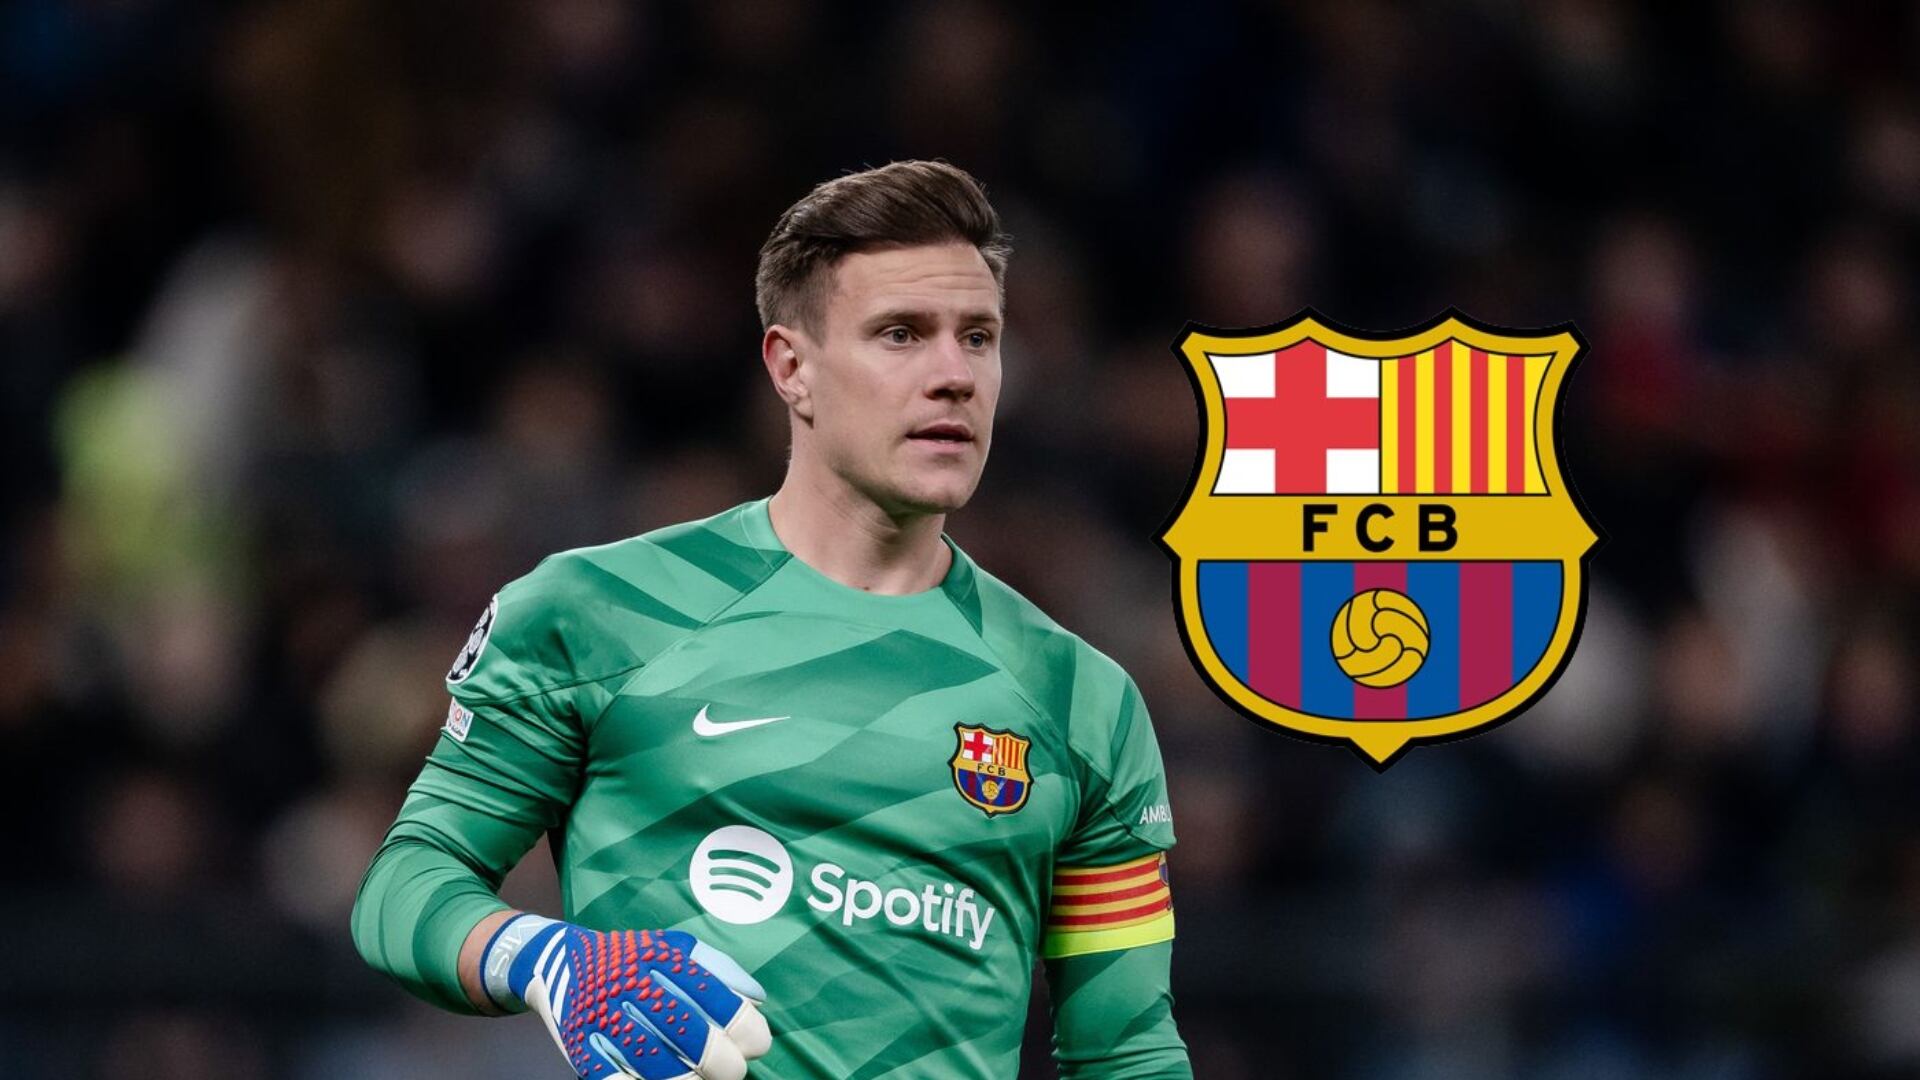 He hasn’t played for a year, but Barcelona will look him as Ter Stegen’s replacement for next season